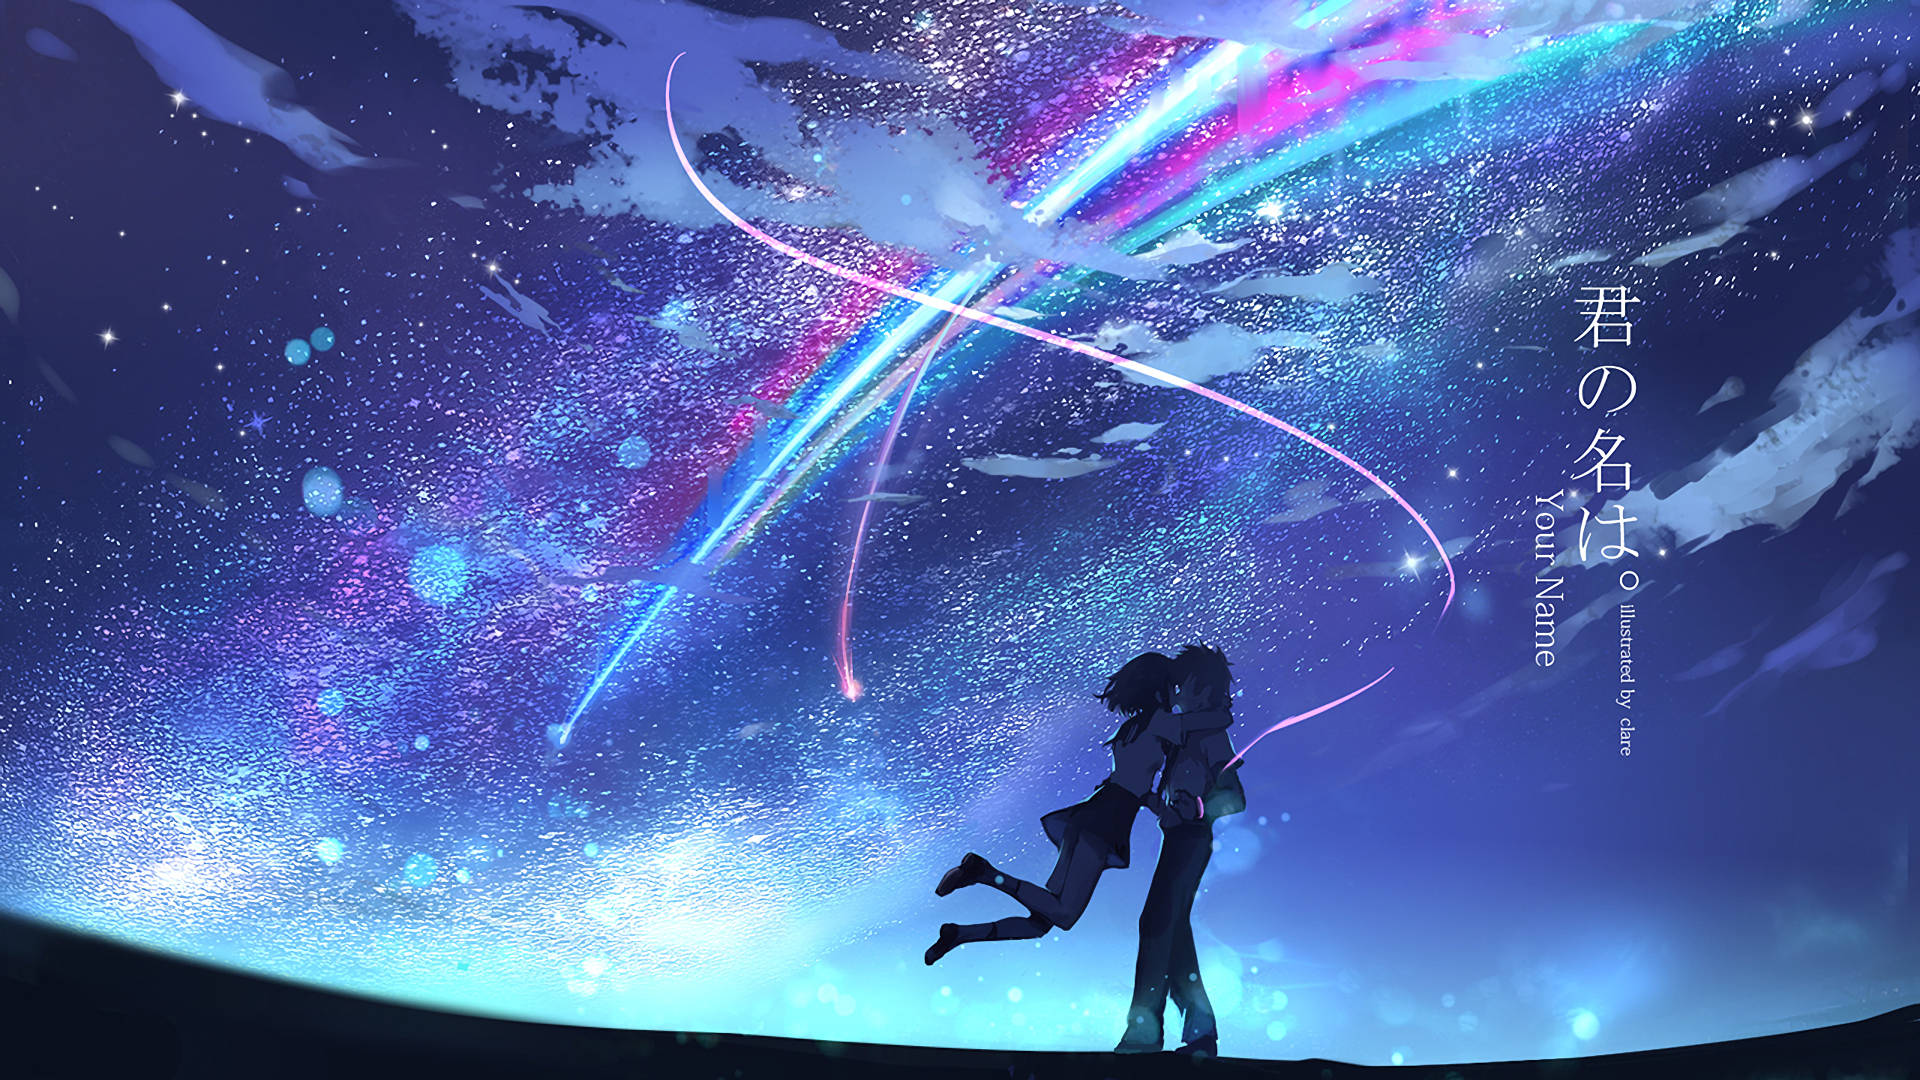 Your Name Anime 2016 Comet Illustration